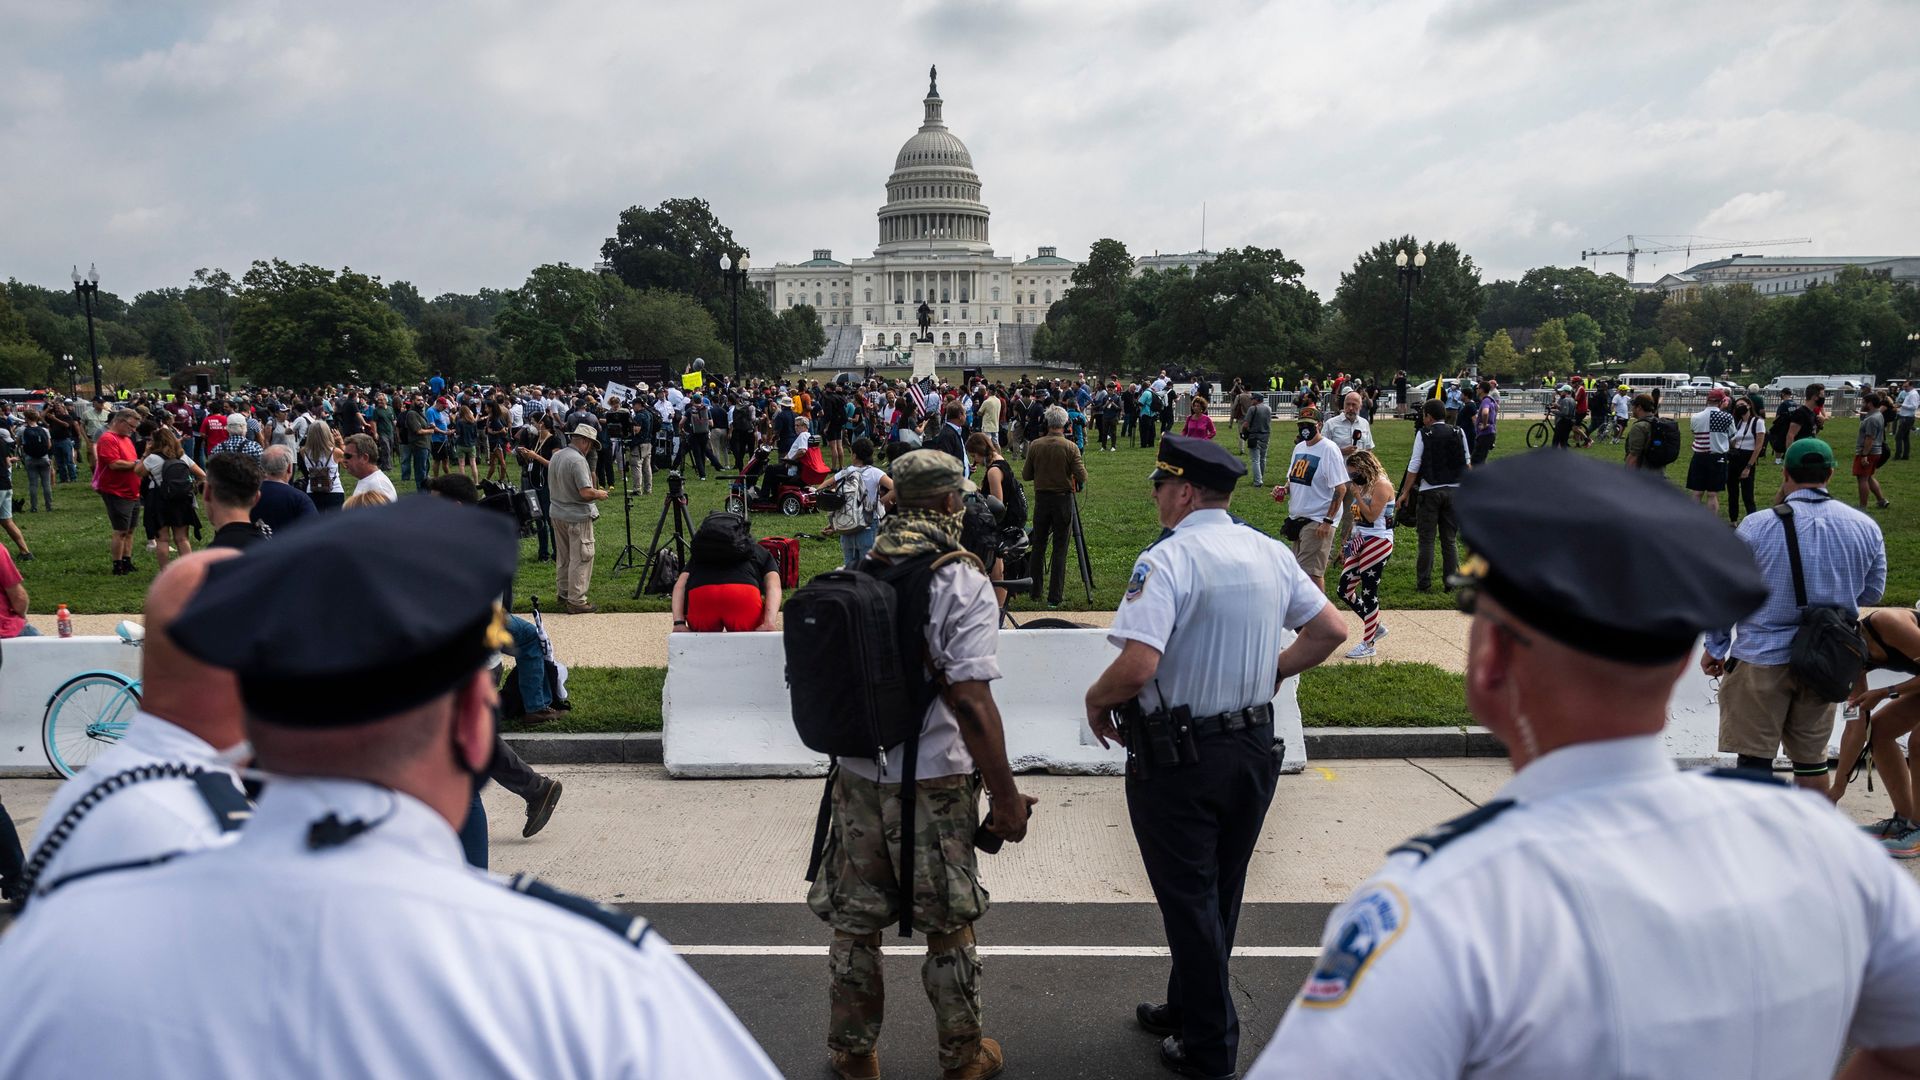 Police officers watch as demonstrators gather for the "Justice for J6" rally in Washington, DC, on September 18, 2021,